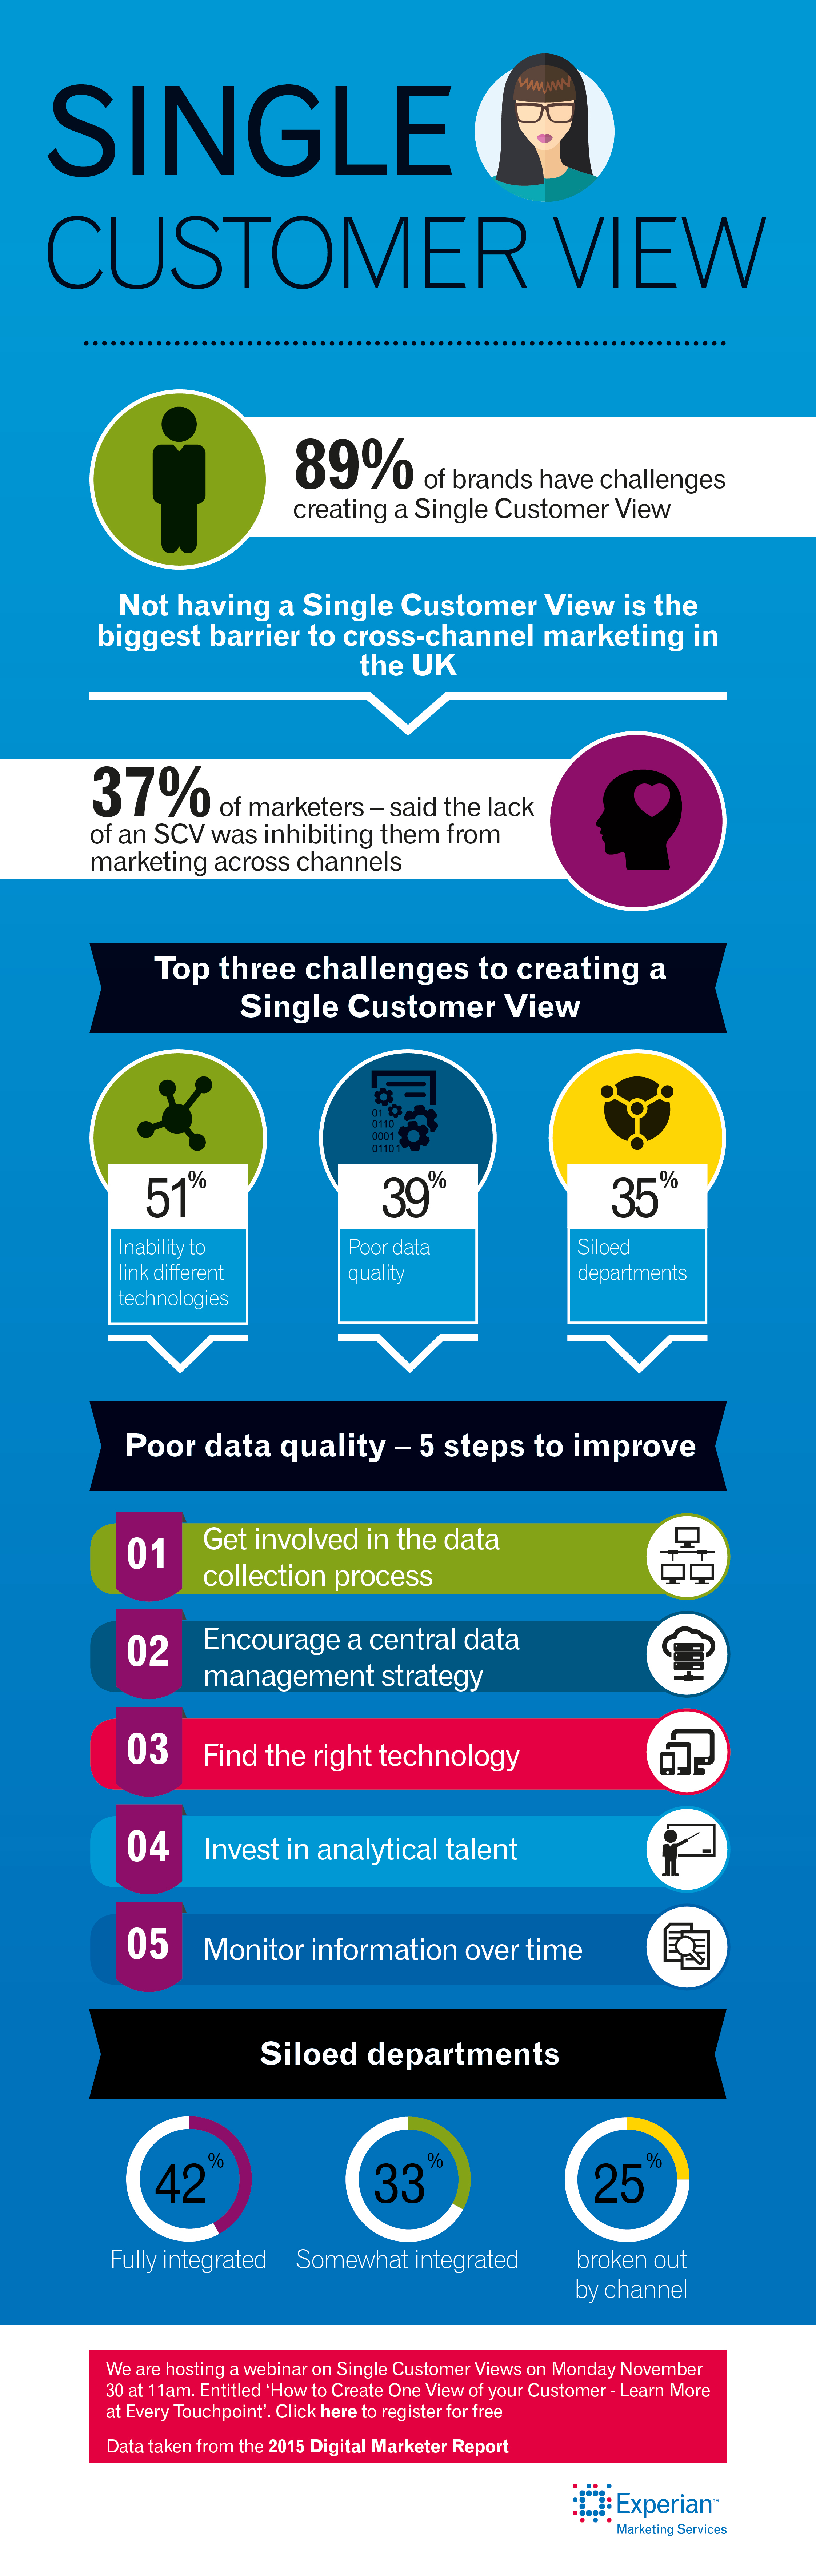 2016-1-8Experian_Single_Customer_View_Infographic-v1